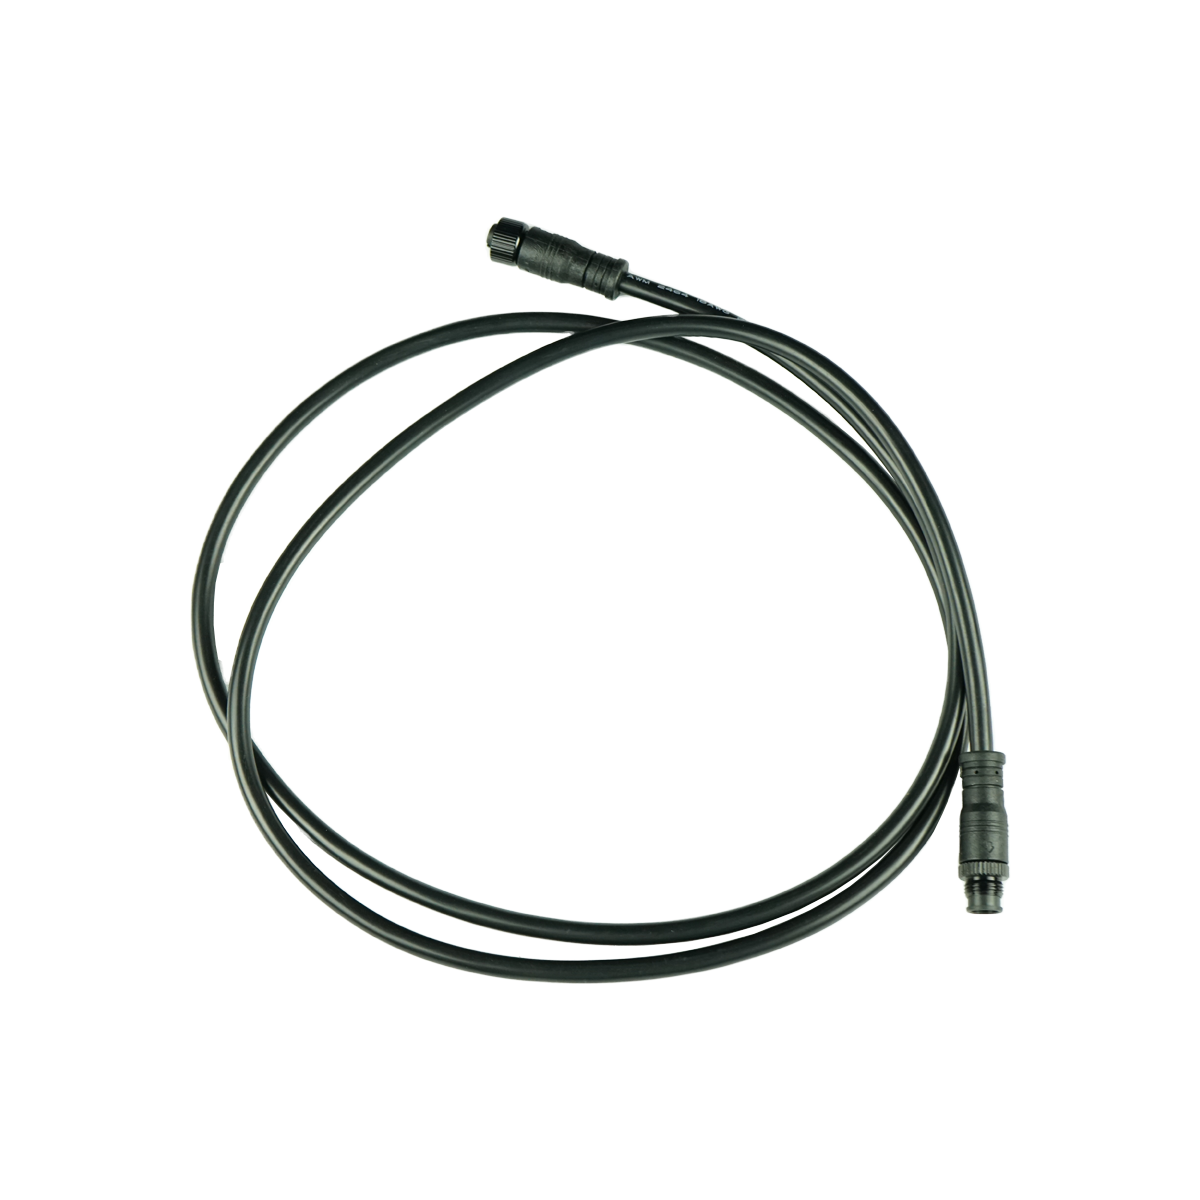 Bistro Light Extension Cable